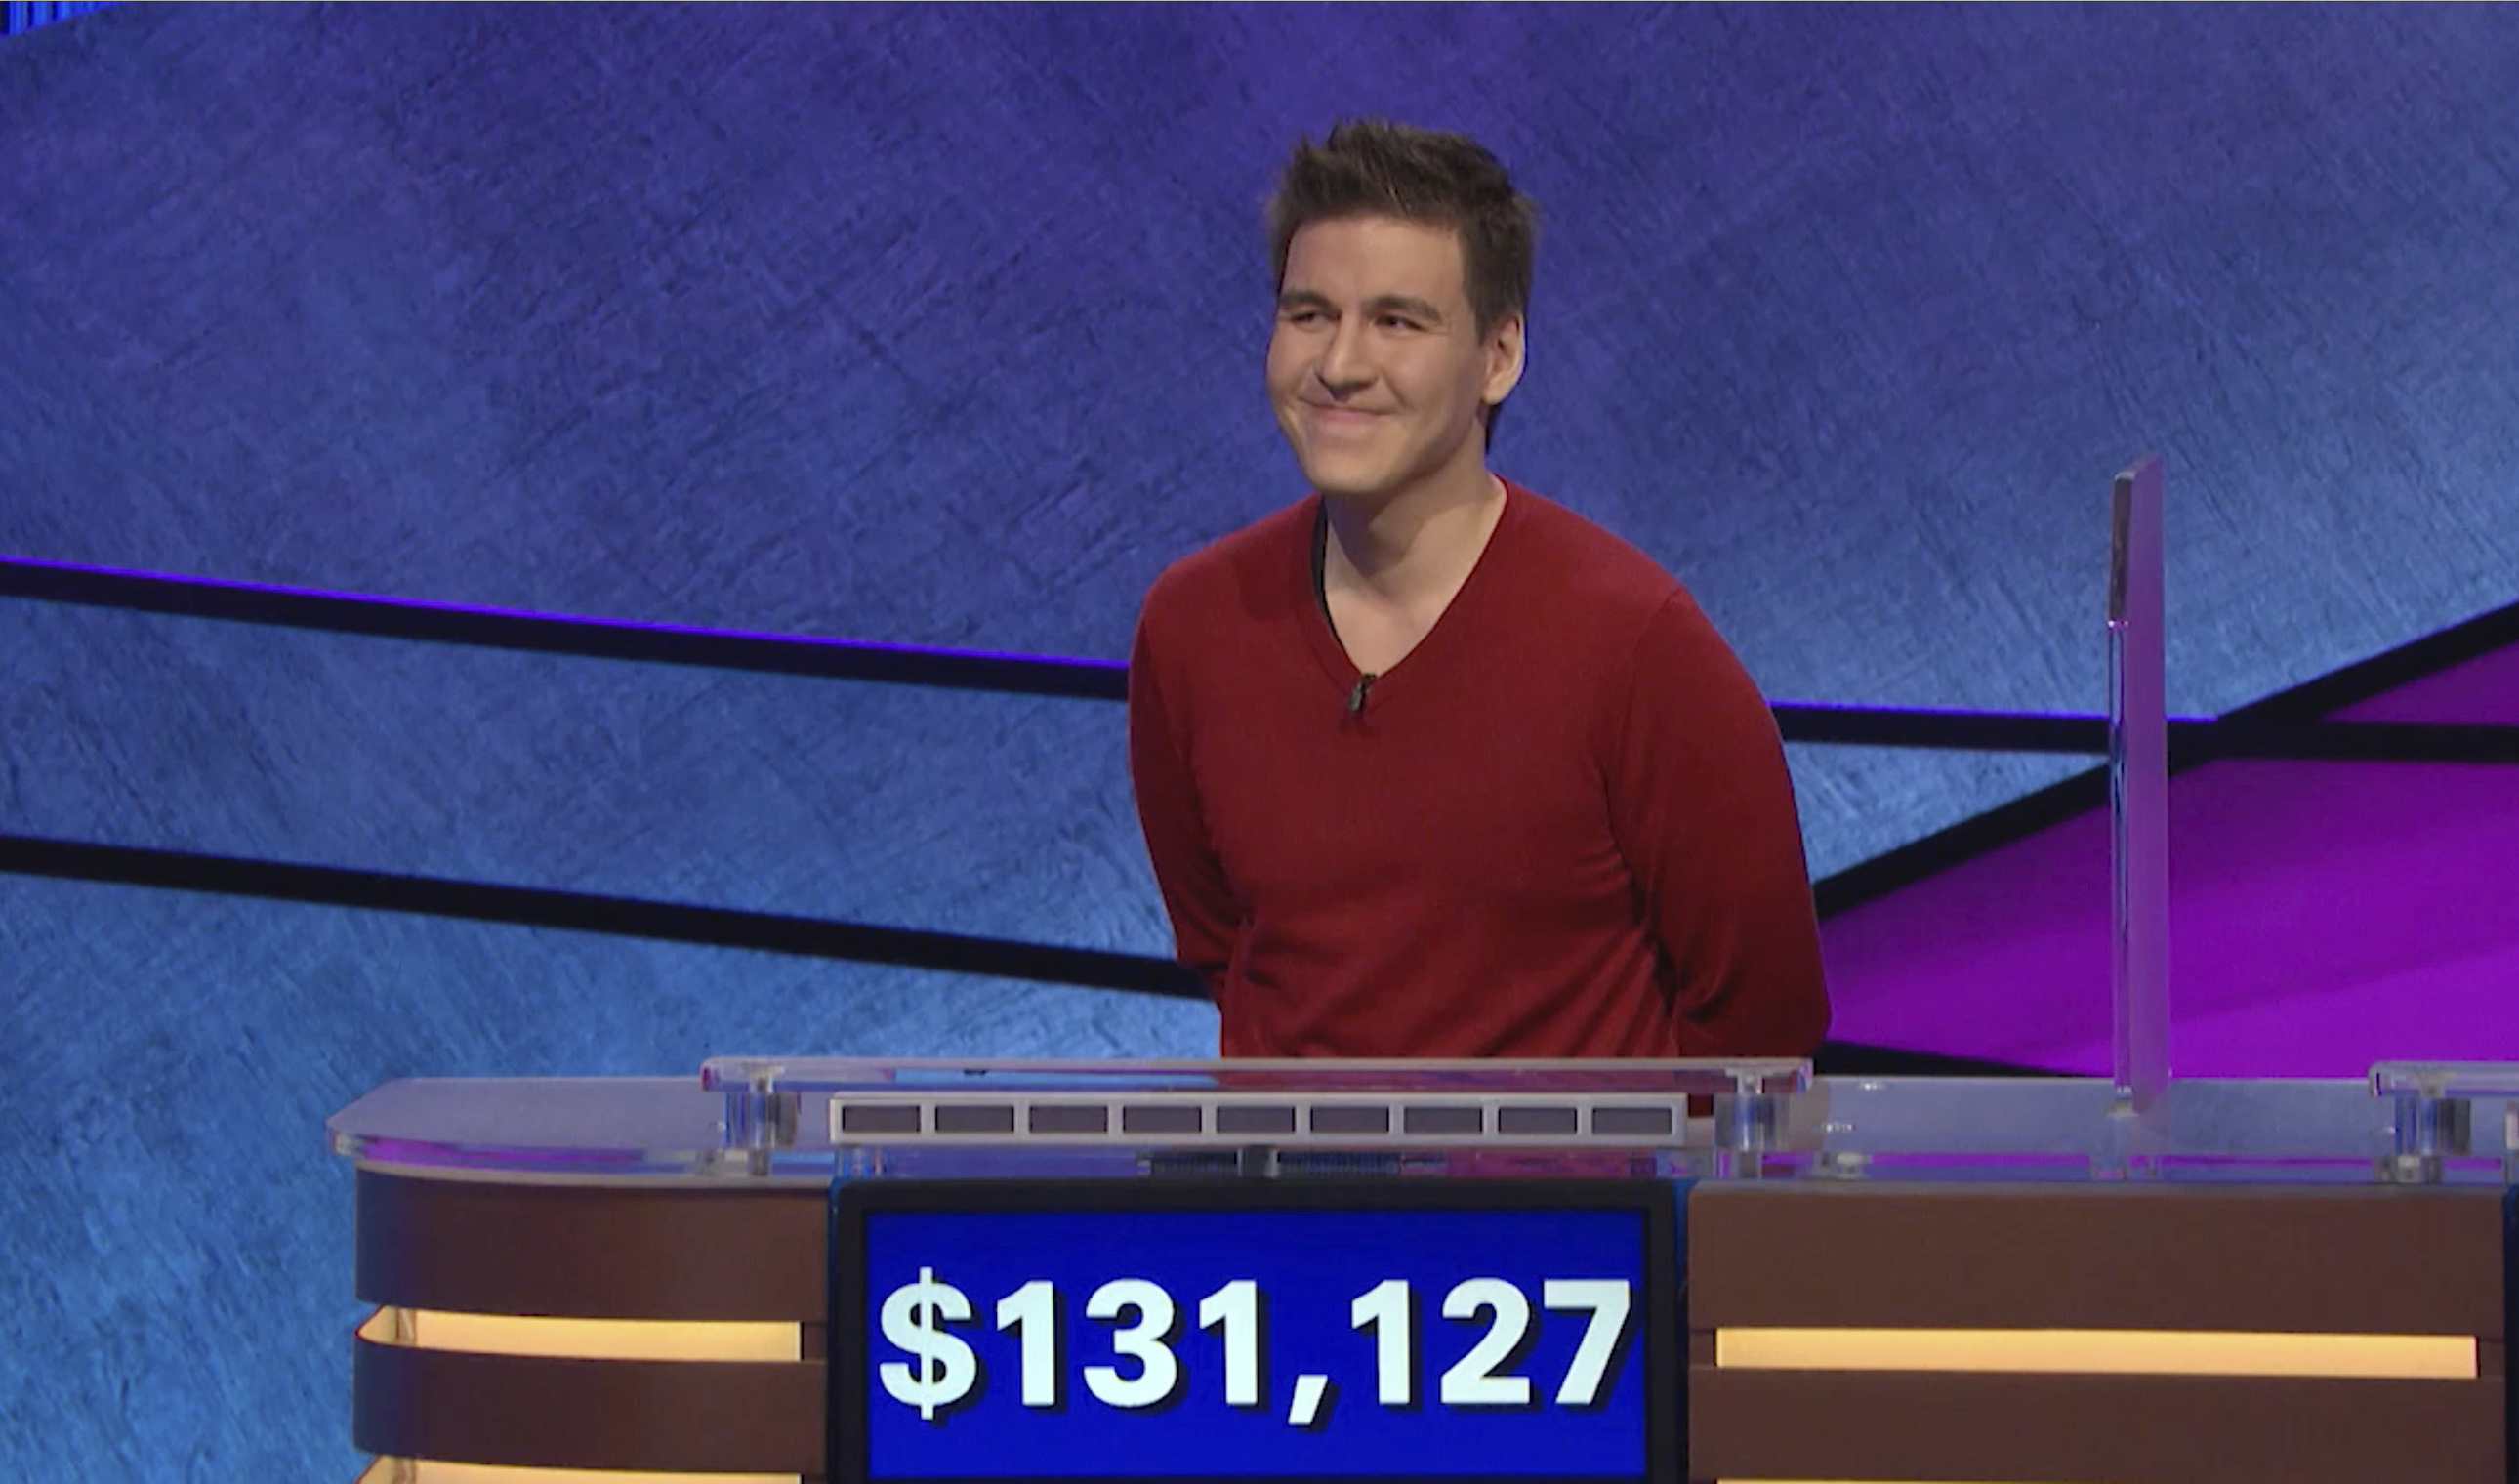 "Jeopardy!" contestant James Holzhauer on an episode that aired on April 17, 2019